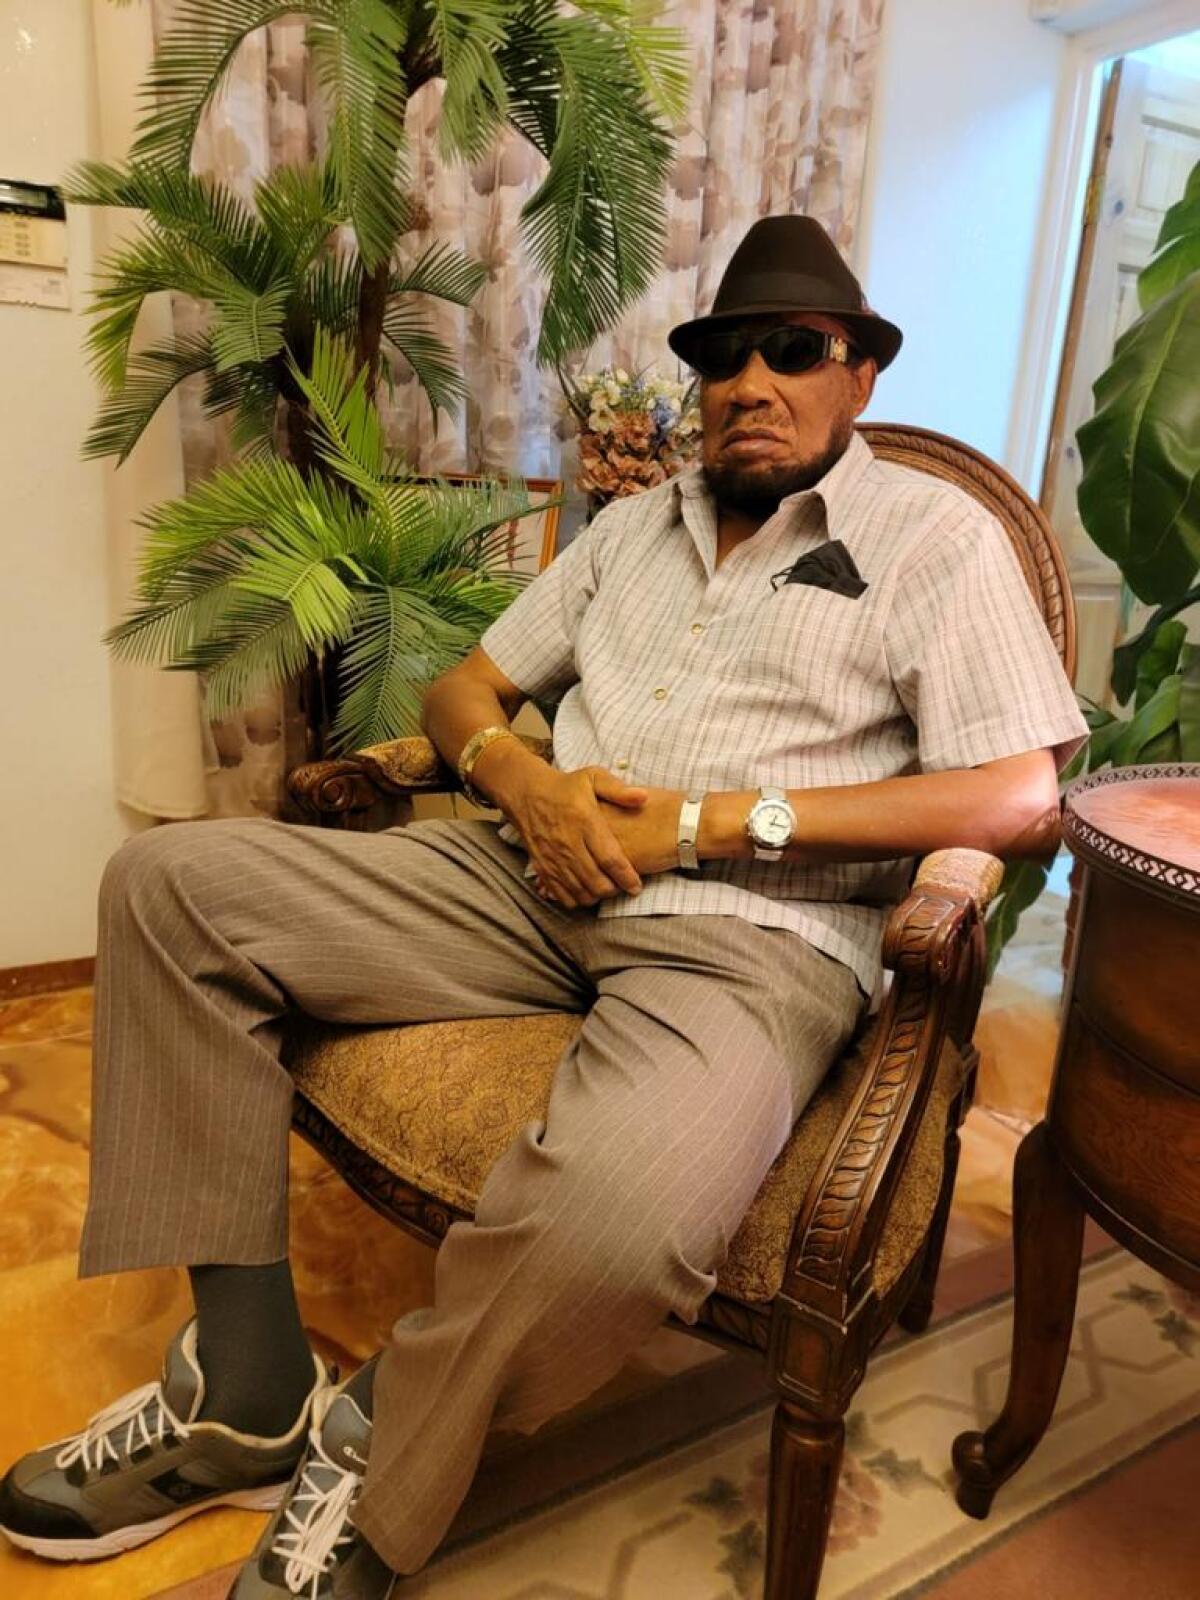 Derrick Morgan sits for portrait wearing his black hat and sunglasses.